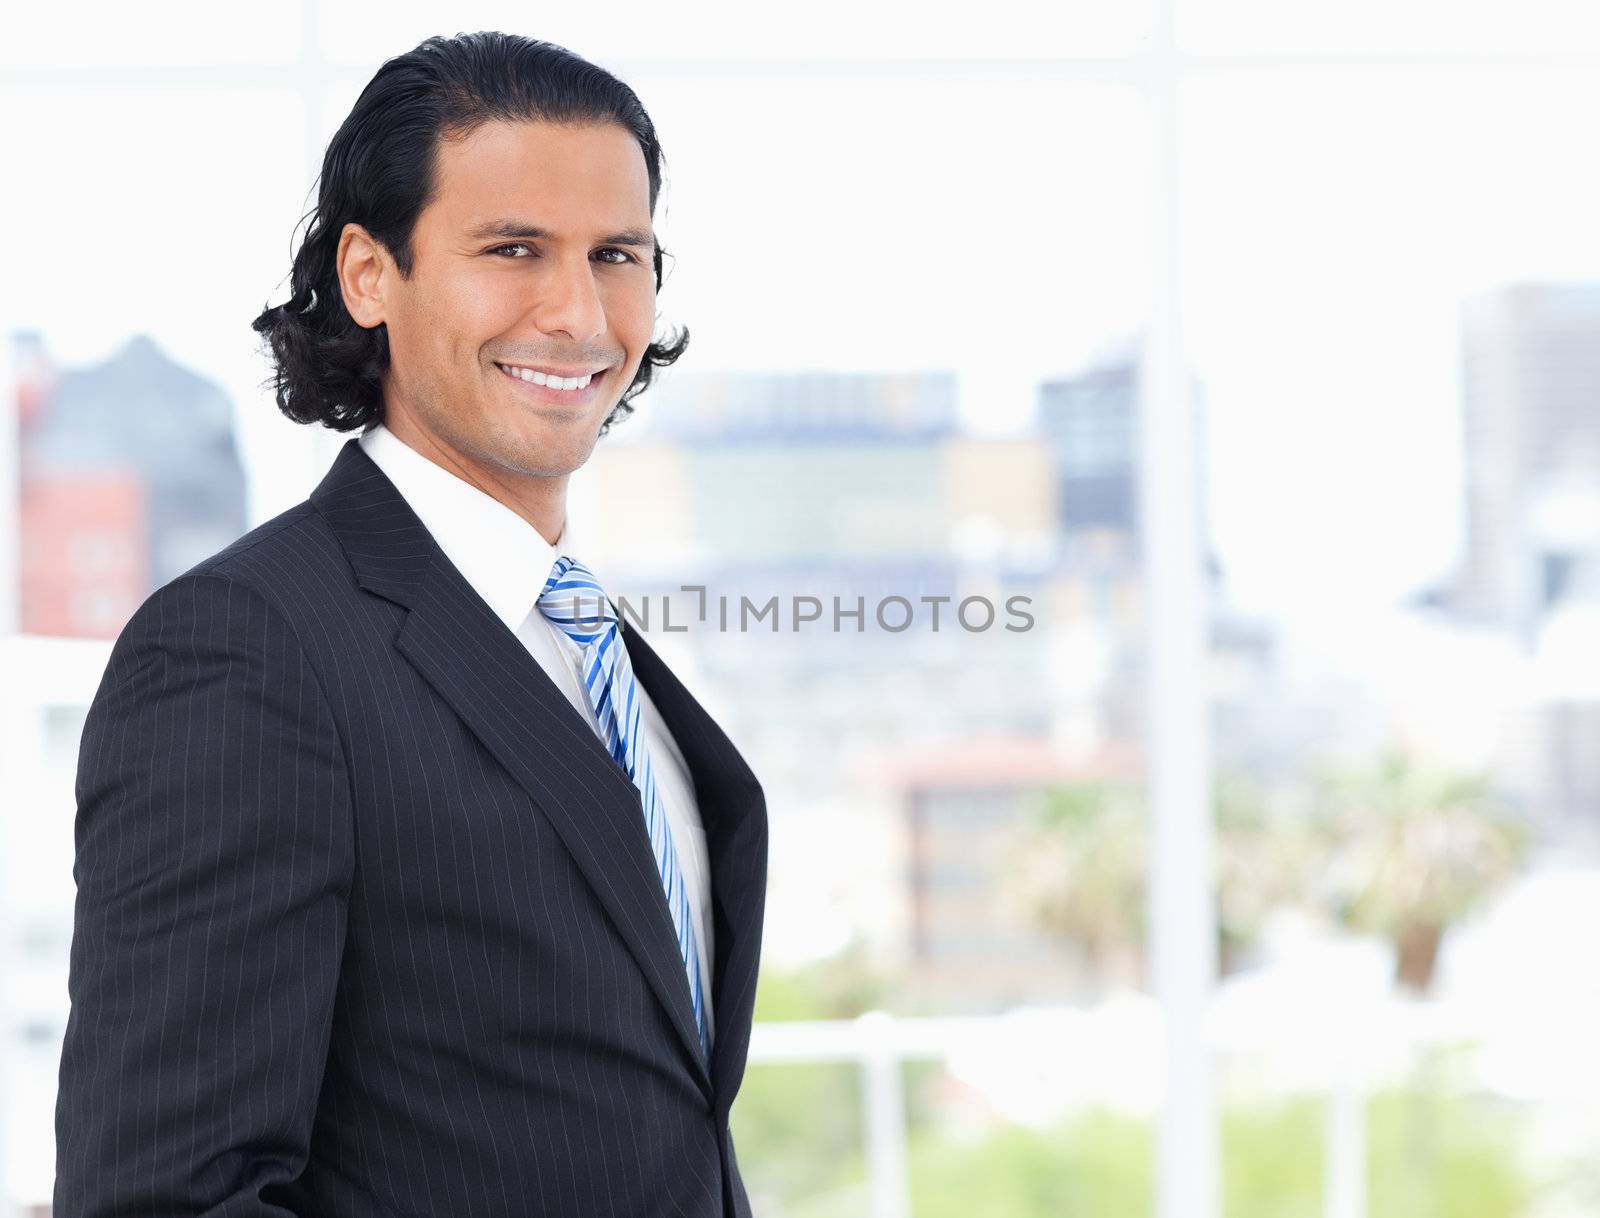 Executive proudly standing in front of a window